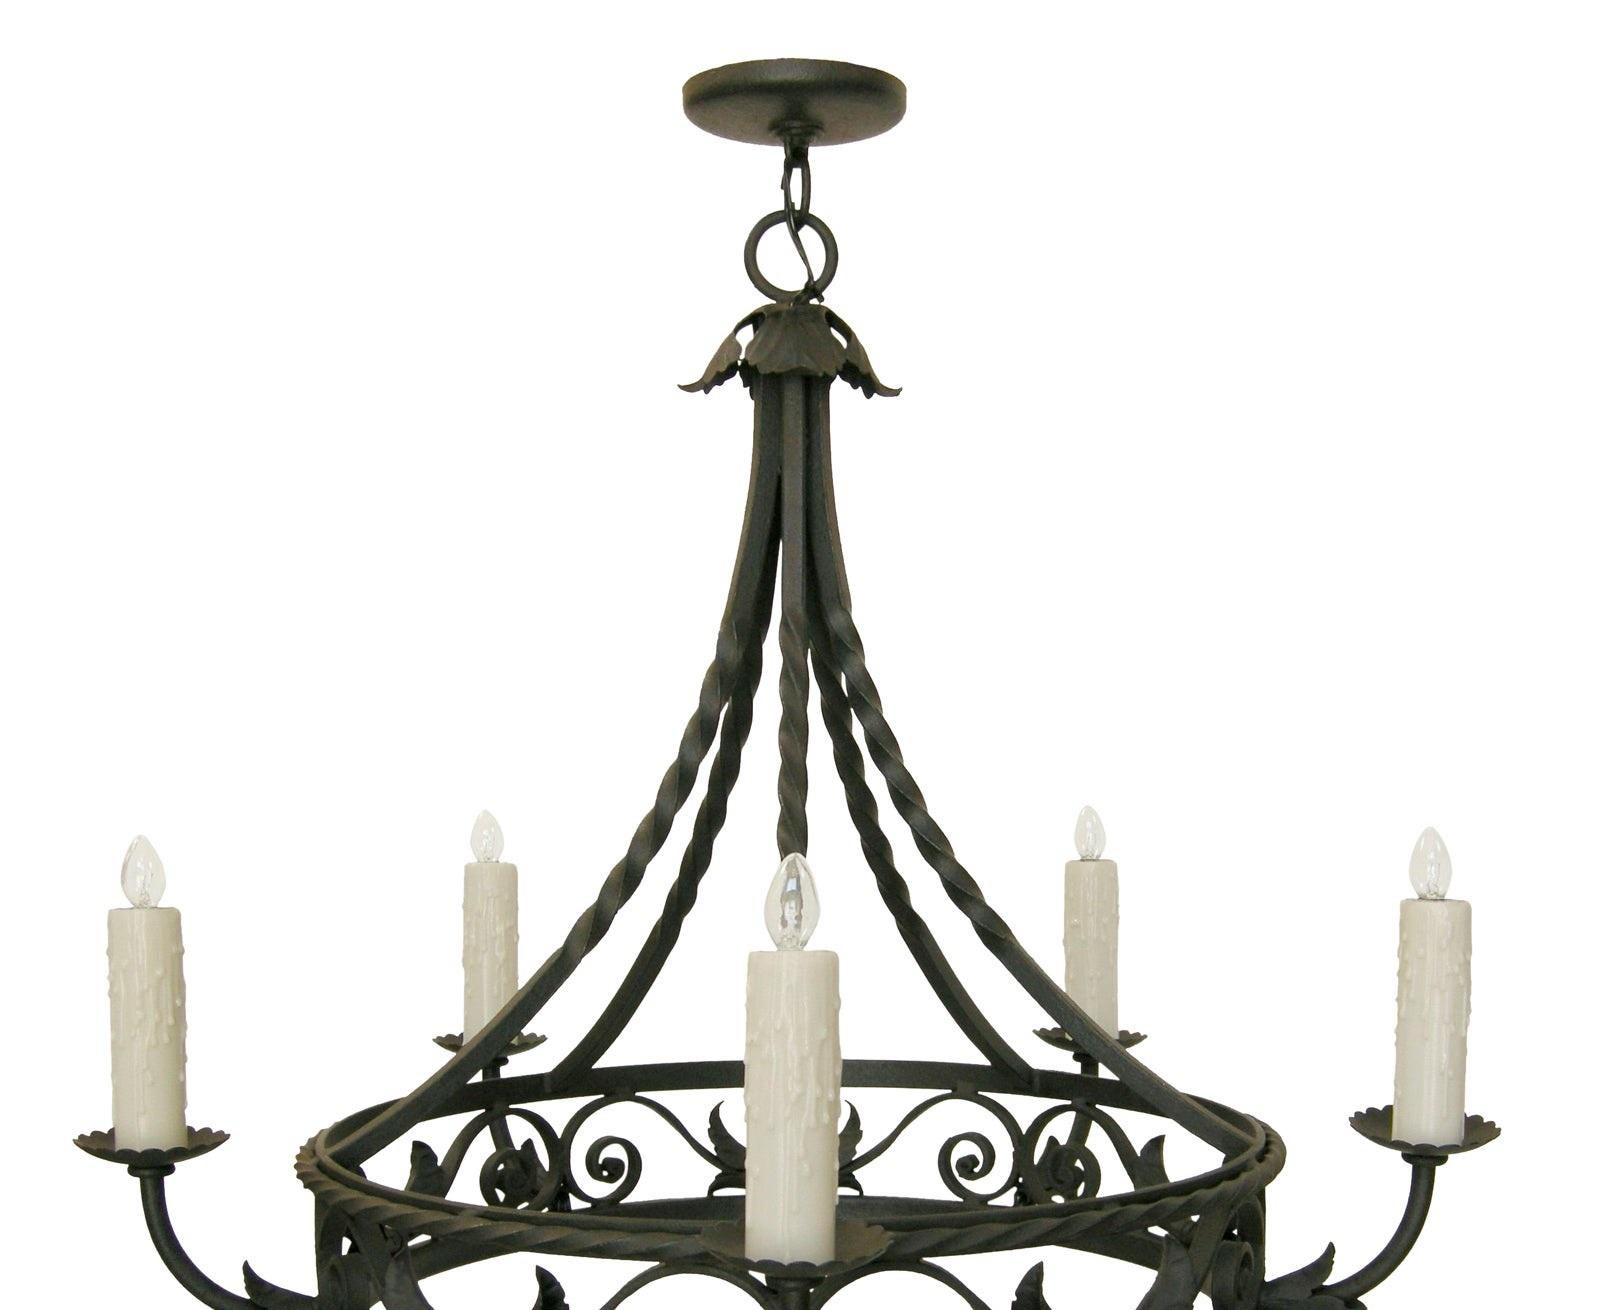 North American Spanish Colonial Wrought Iron Five-Light Chandelier by Randy Esada